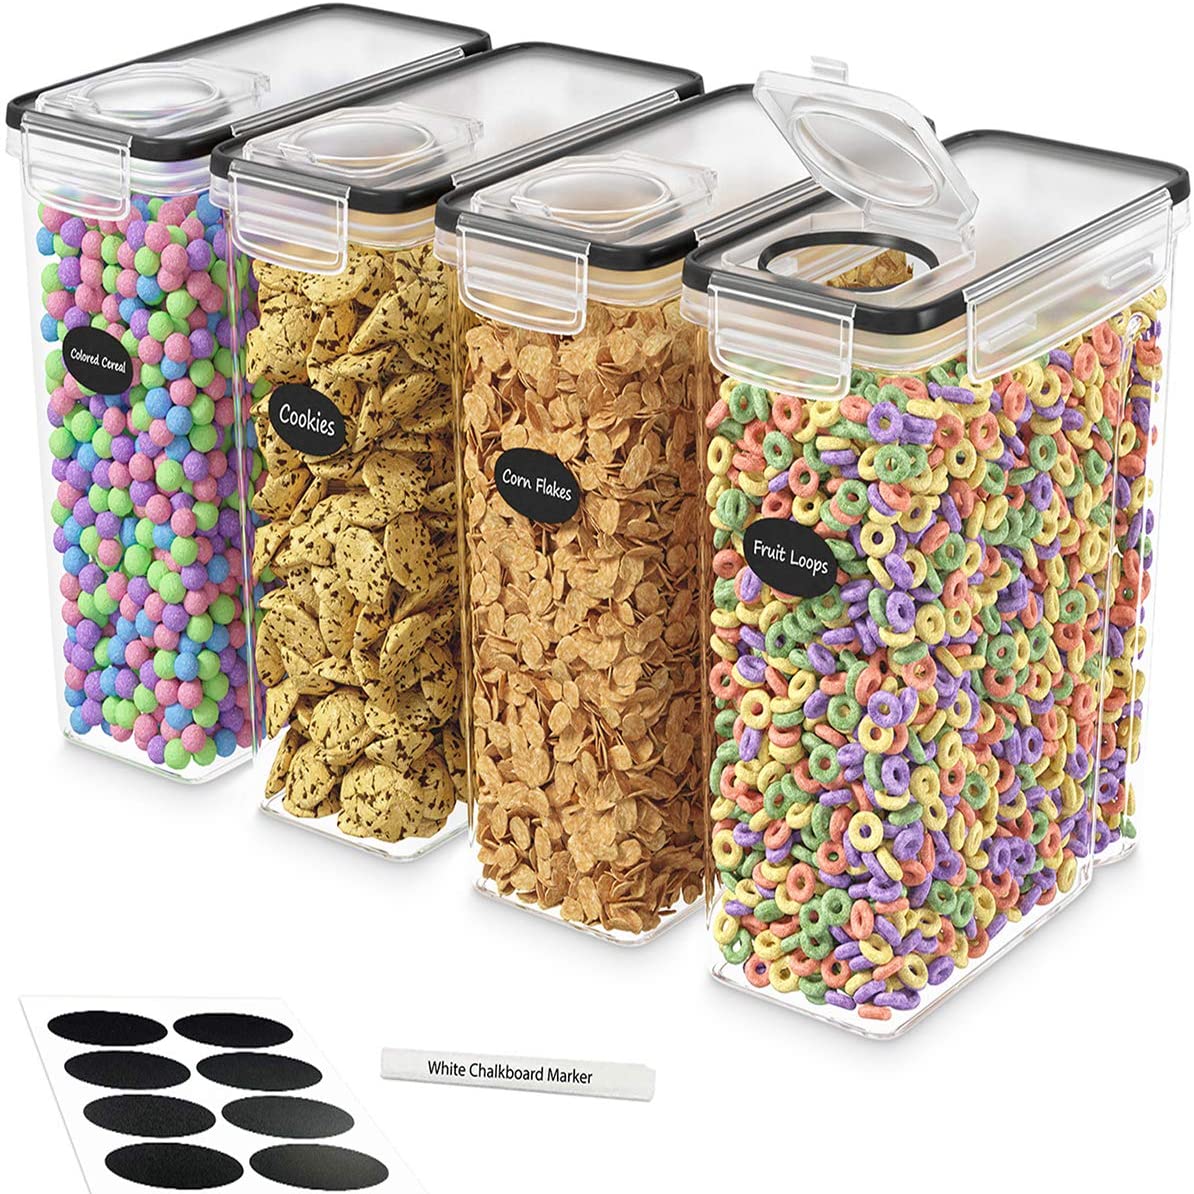 Cereal Containers Storage Set